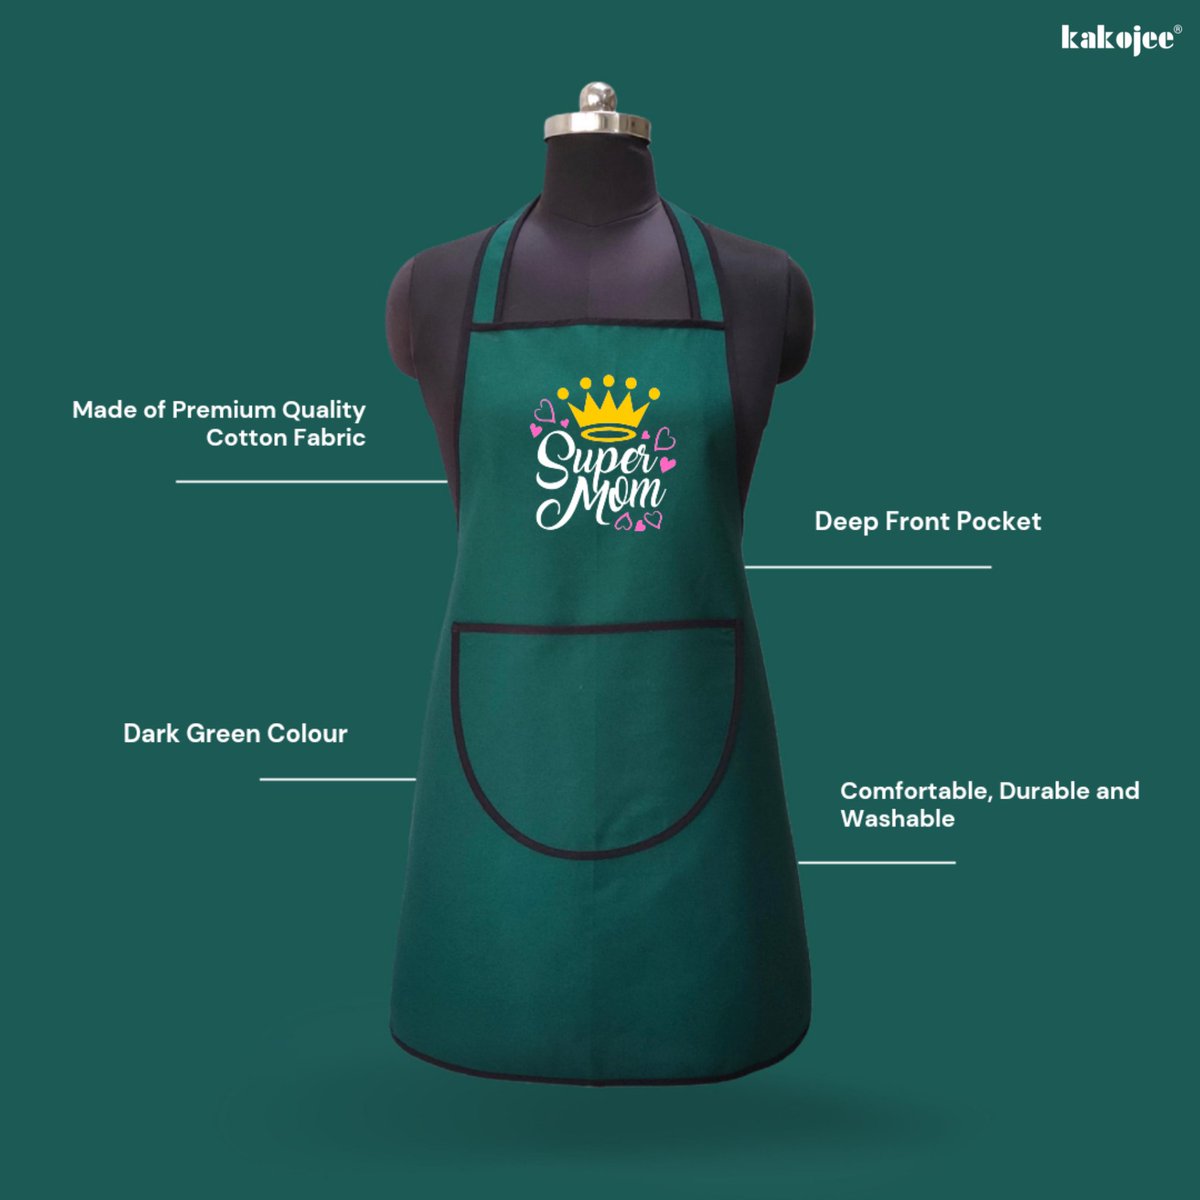 Supercharge your mom game with our 'Super Mom' apron! Perfect for multitasking in the kitchen or getting crafty with the kids. 

Shop now and show off your superpowers!

#kakojee #kakojeeapron #supermom #apronlove #momlife 💪🏽💕